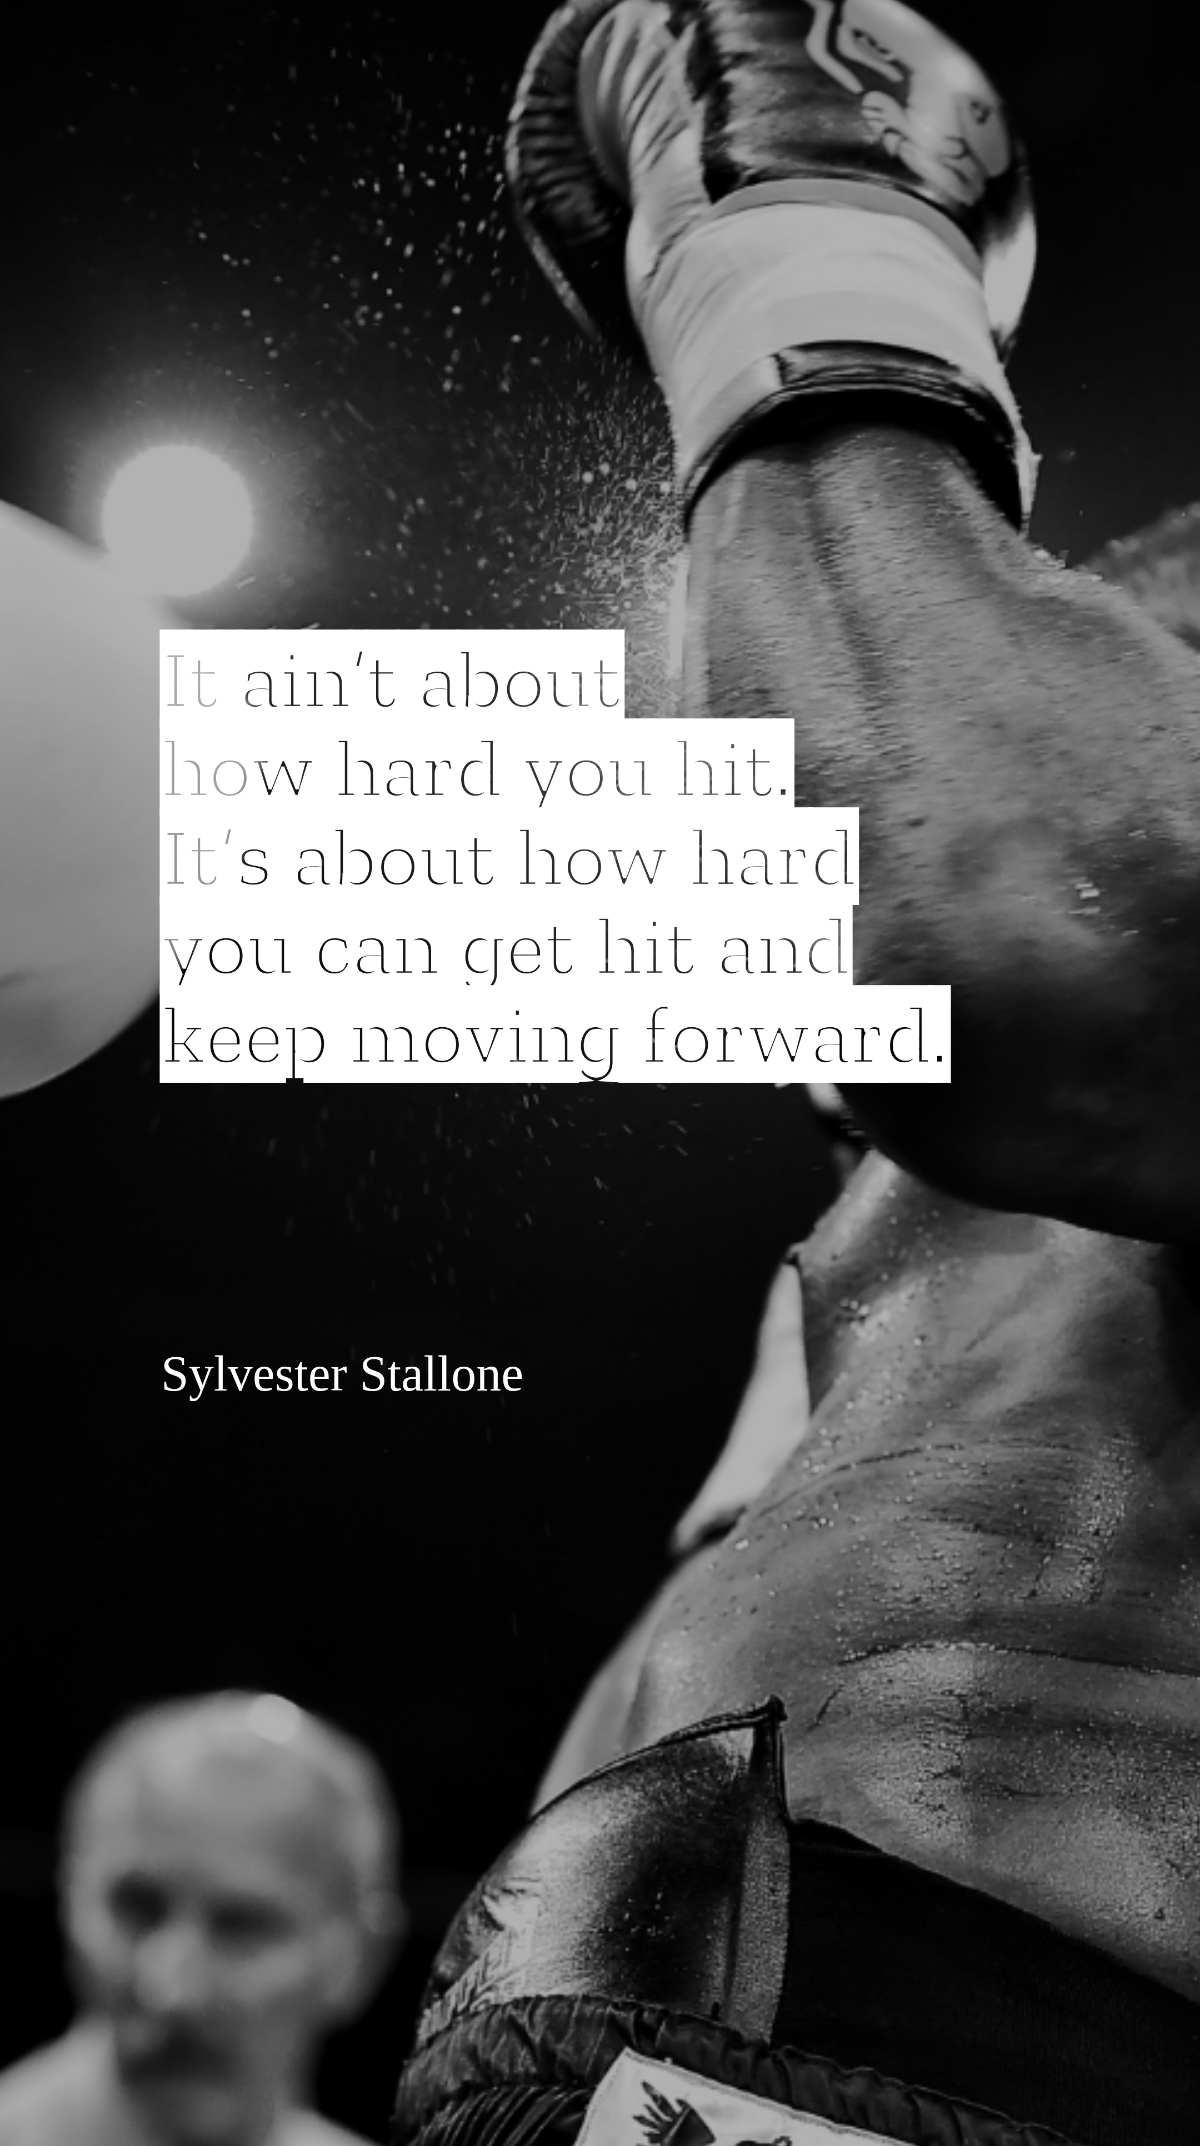 Sylvester Stallone - It ain’t about how hard you hit. It’s about how hard you can get hit and keep moving forward. Template